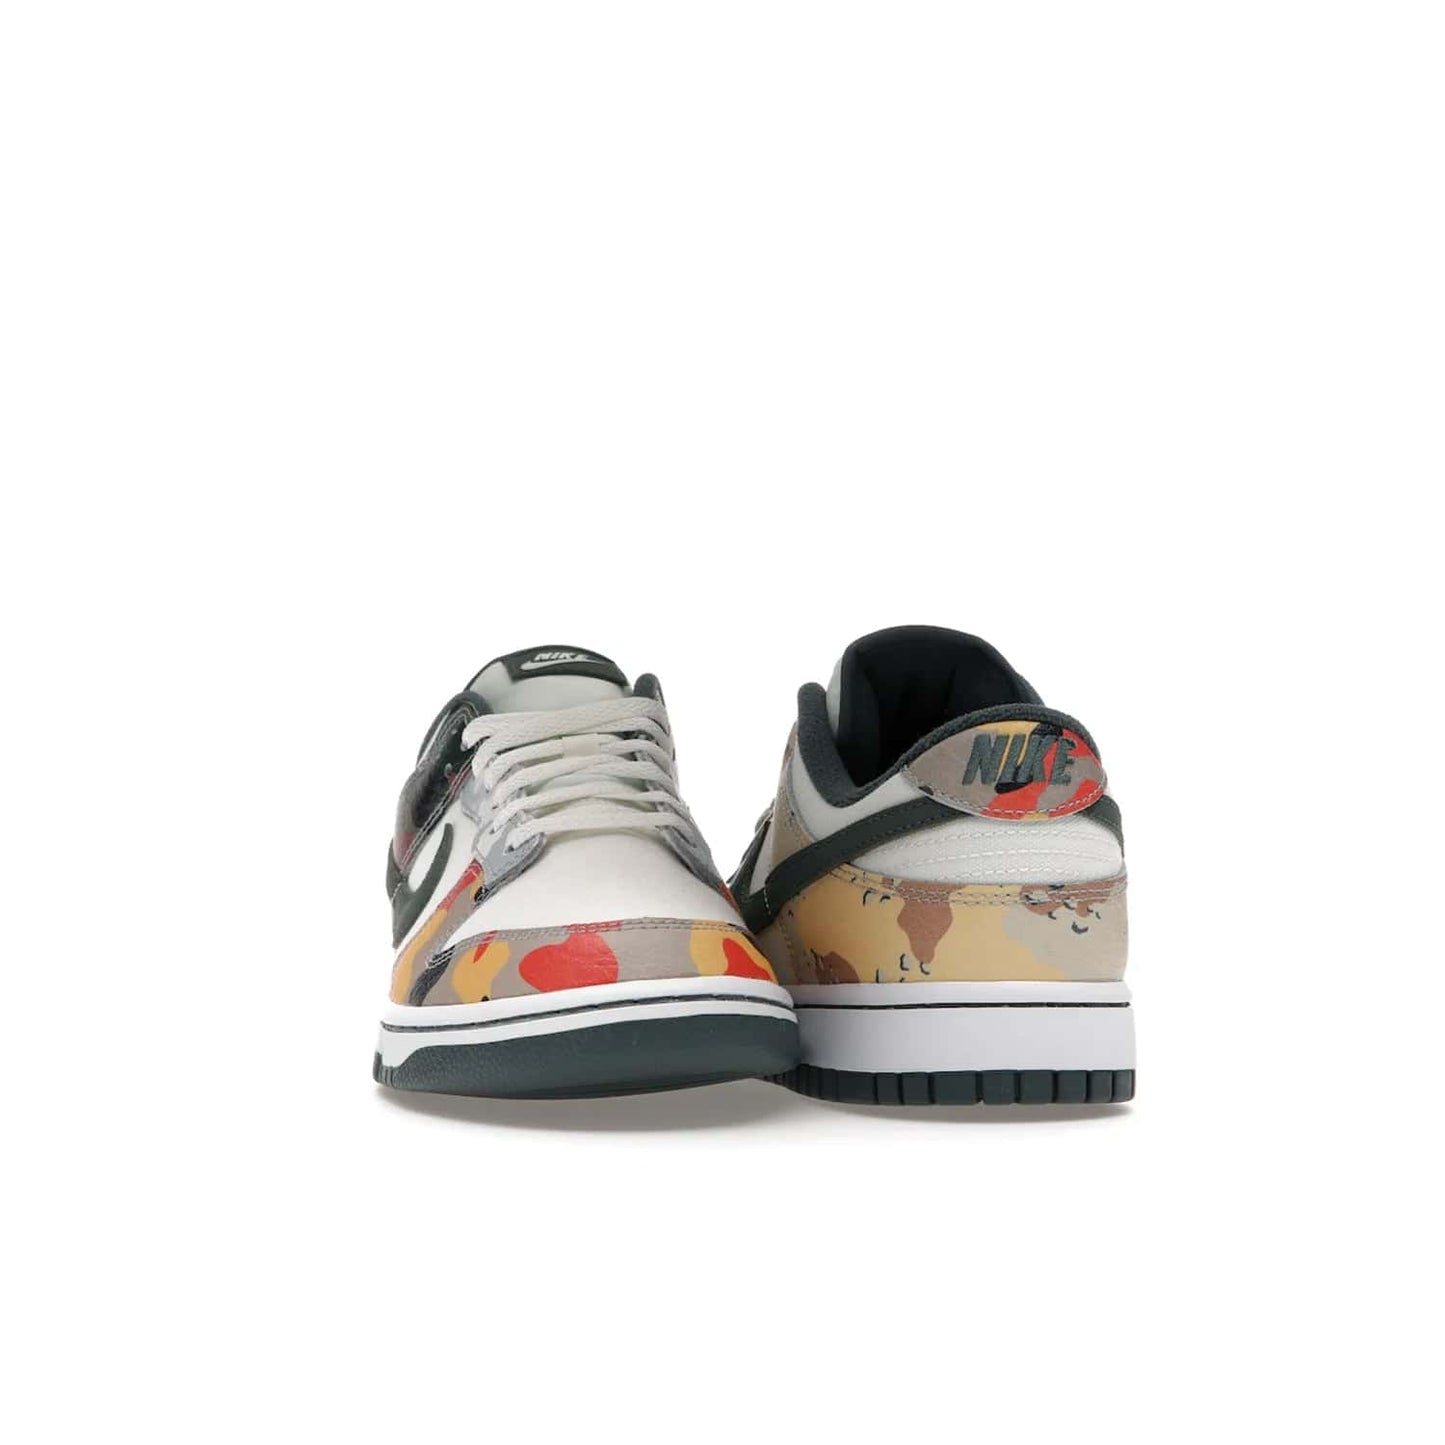 Nike Dunk Low SE Sail Multi-Camo - Image 9 - Only at www.BallersClubKickz.com - Classic design meets statement style in the Nike Dunk Low SE Sail Multi-Camo. White leather base with multi-color camo overlays, vibrant Nike Swooshes, and orange Nike embroidery. Get yours August 2021.